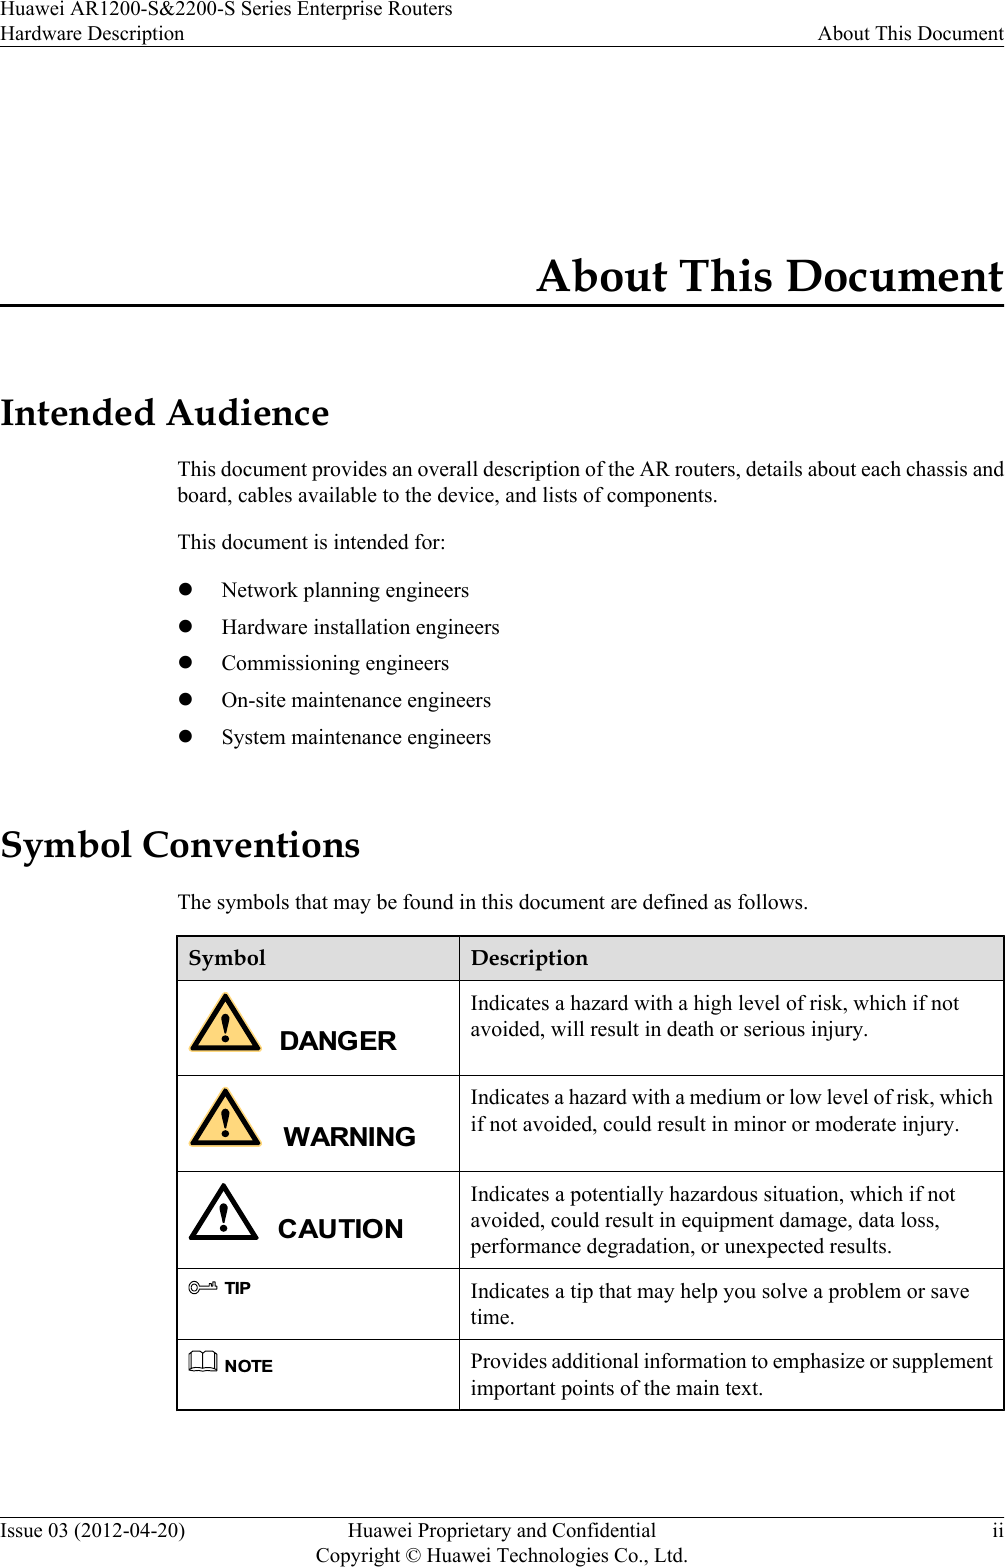 About This DocumentIntended AudienceThis document provides an overall description of the AR routers, details about each chassis andboard, cables available to the device, and lists of components.This document is intended for:lNetwork planning engineerslHardware installation engineerslCommissioning engineerslOn-site maintenance engineerslSystem maintenance engineersSymbol ConventionsThe symbols that may be found in this document are defined as follows.Symbol DescriptionDANGERIndicates a hazard with a high level of risk, which if notavoided, will result in death or serious injury.WARNINGIndicates a hazard with a medium or low level of risk, whichif not avoided, could result in minor or moderate injury.CAUTIONIndicates a potentially hazardous situation, which if notavoided, could result in equipment damage, data loss,performance degradation, or unexpected results.TIPIndicates a tip that may help you solve a problem or savetime.NOTEProvides additional information to emphasize or supplementimportant points of the main text. Huawei AR1200-S&amp;2200-S Series Enterprise RoutersHardware Description About This DocumentIssue 03 (2012-04-20) Huawei Proprietary and ConfidentialCopyright © Huawei Technologies Co., Ltd.ii